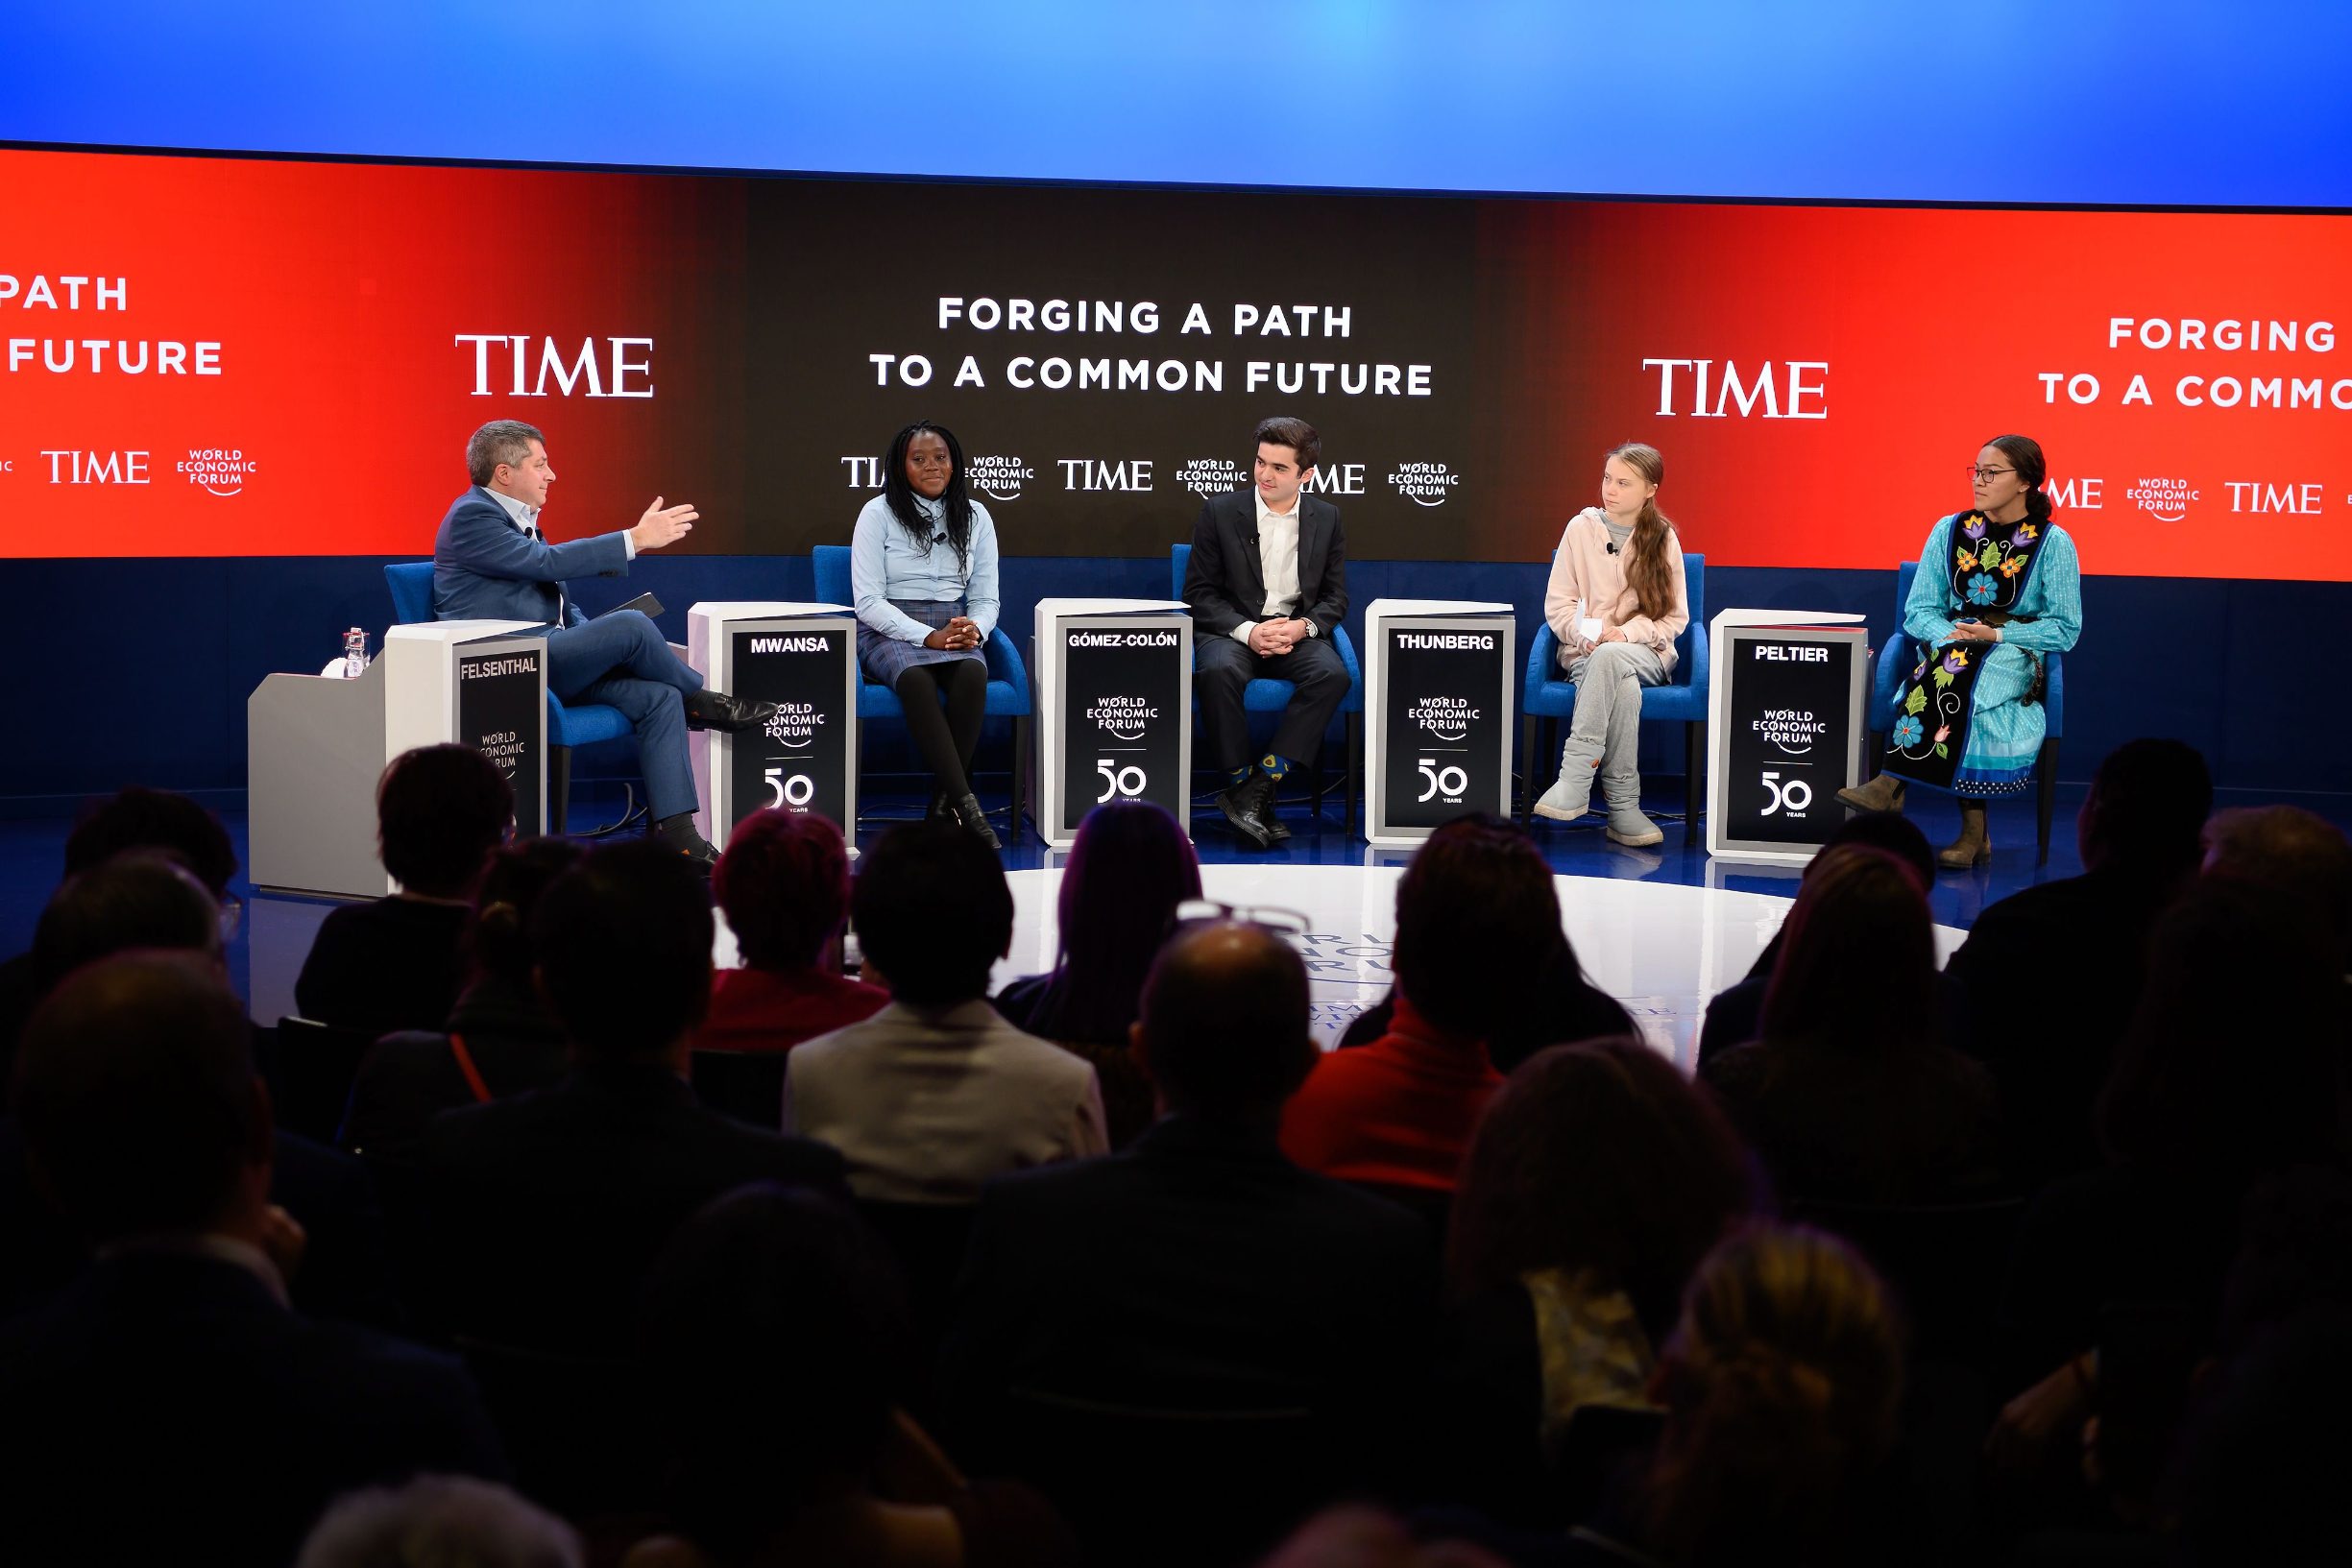 Swedish climate activist Greta Thunberg (2ndR), Canadian climate and environmental activist Autumn Peltier (R), Zambian child and womens rights advocate and activist Natasha Wang Mwansa (2ndL), Puerto Rican founder of Light and Hope for Puerto Rico Salvador Gomez-Colon (C) and US jounalist and Time magazine editor-in-chief Edward Felsenthal (L) attend a session at the Congres center during the World Economic Forum (WEF) annual meeting in Davos, on January 21, 2020. (Photo by Fabrice COFFRINI / AFP)